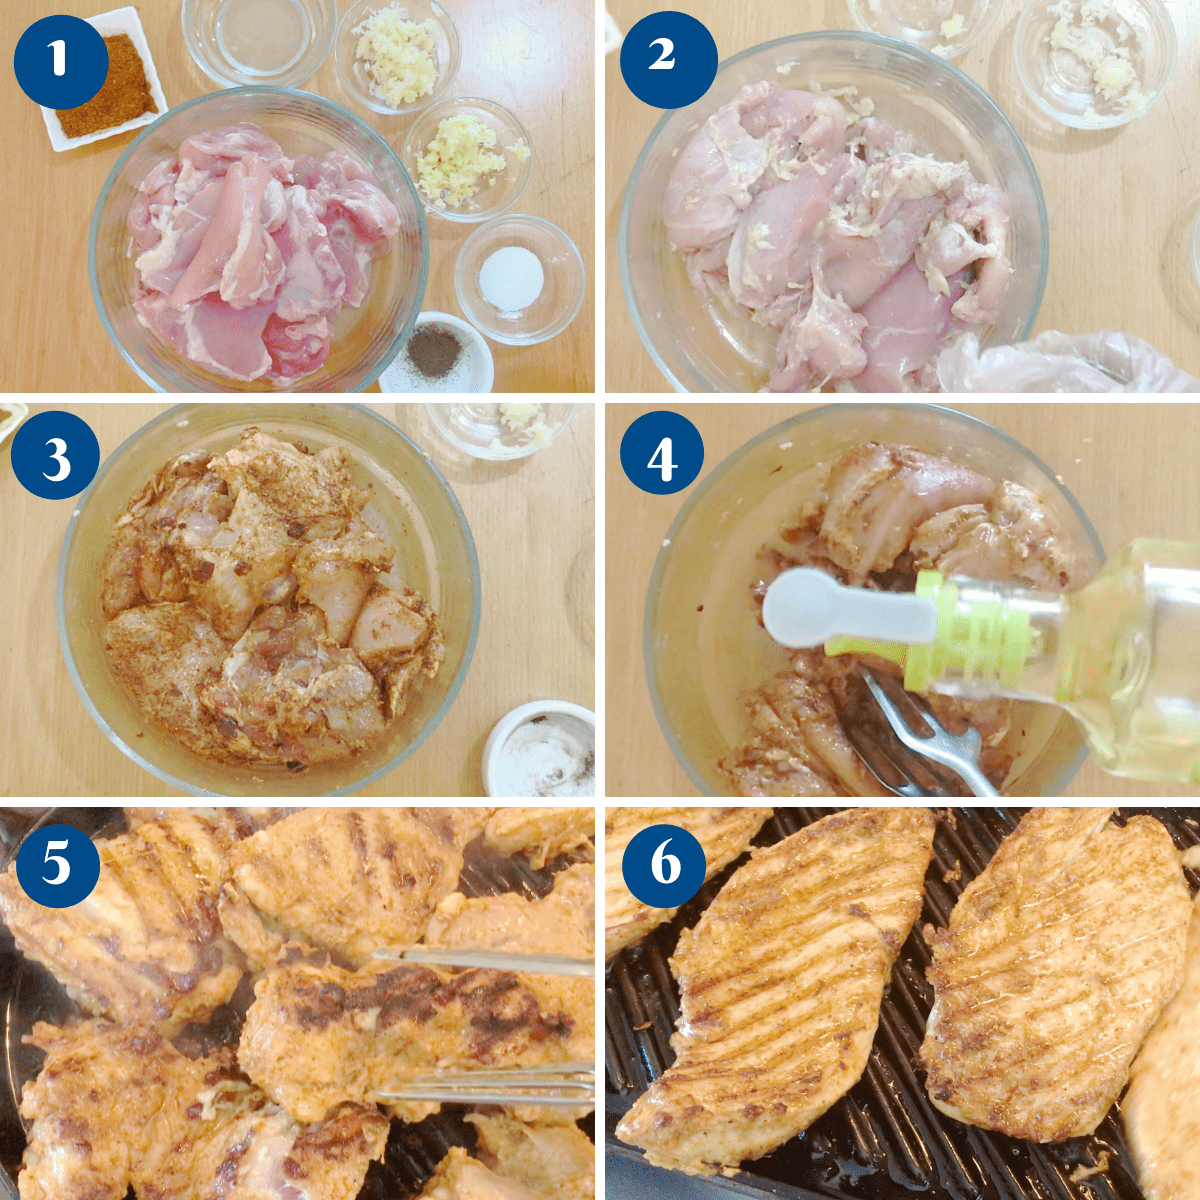 Progress pictures marinating and grilling shawarma chicken.